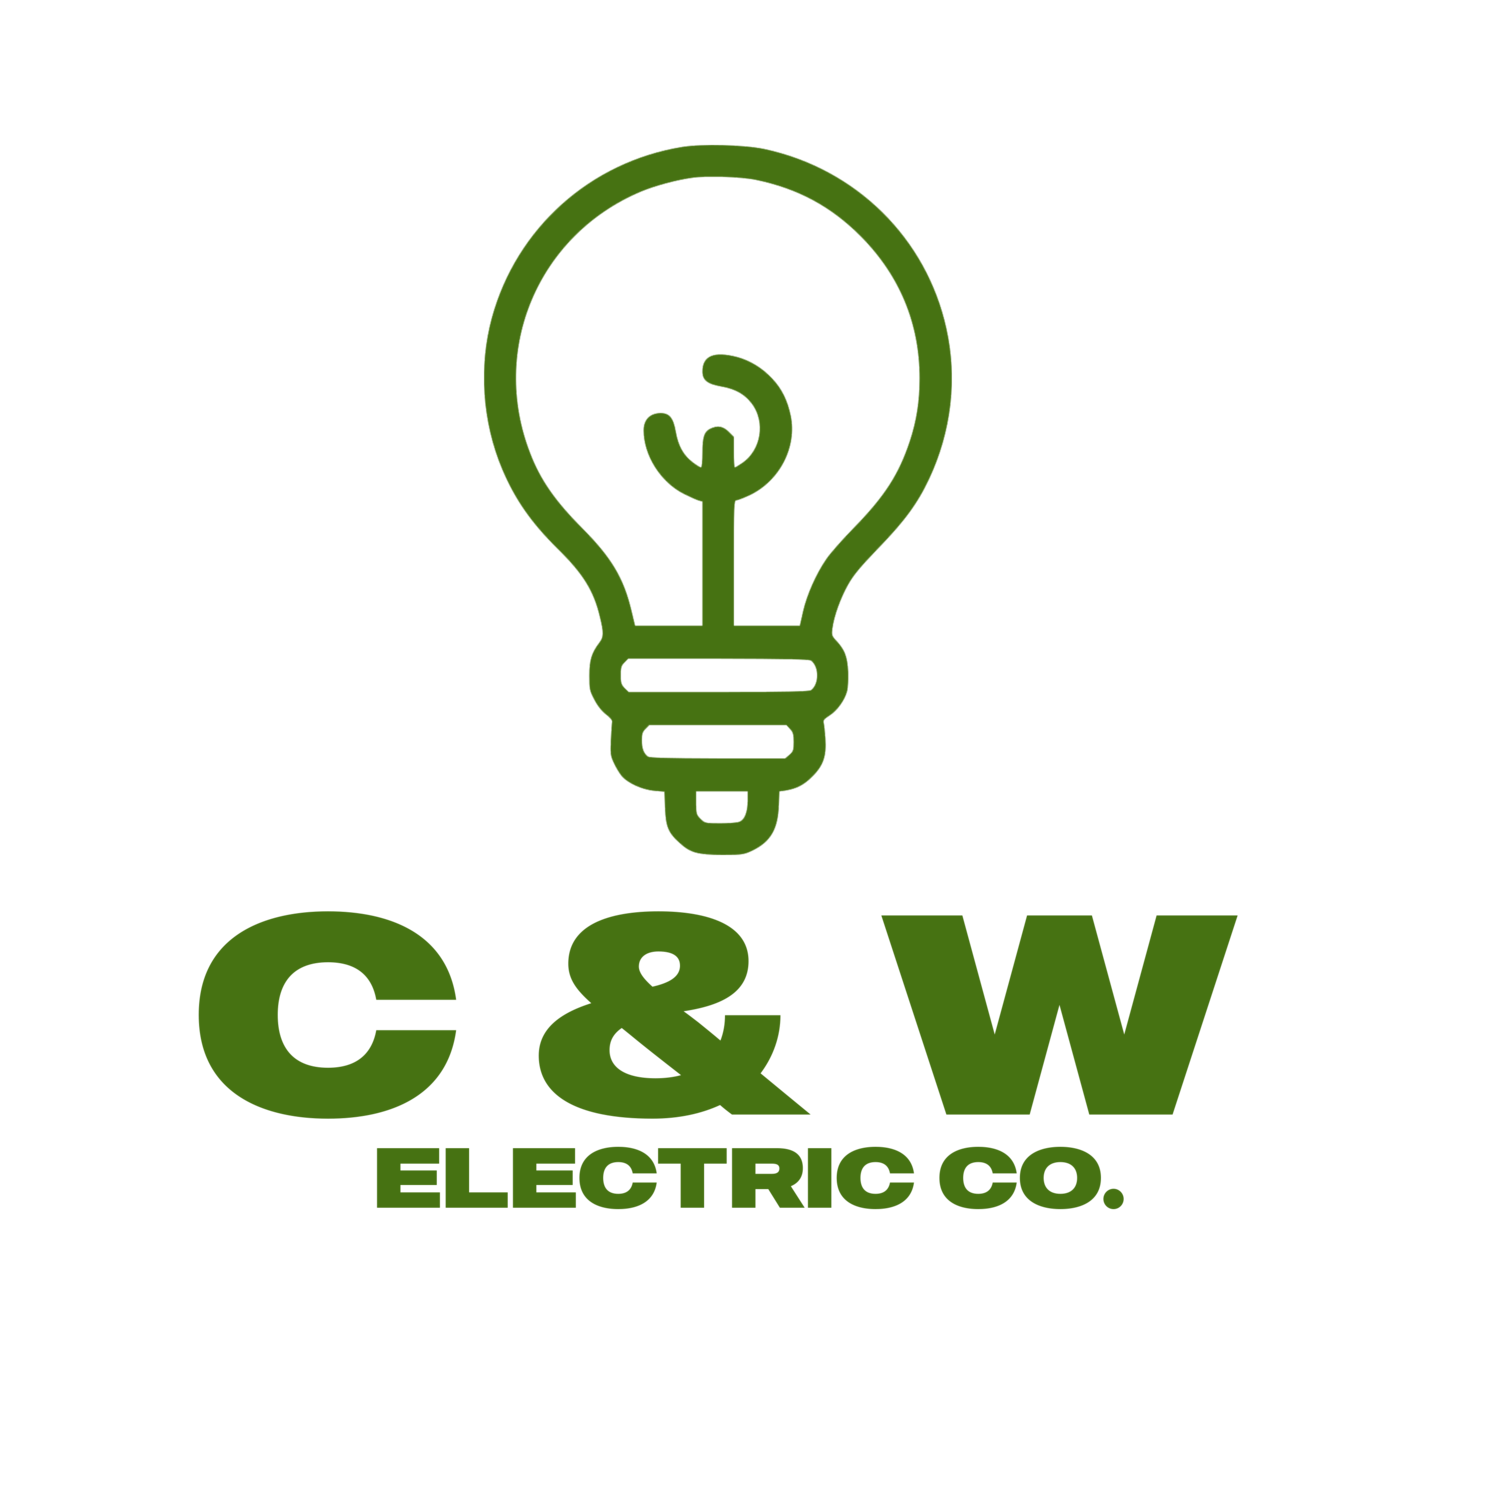 C and W Electric Co.